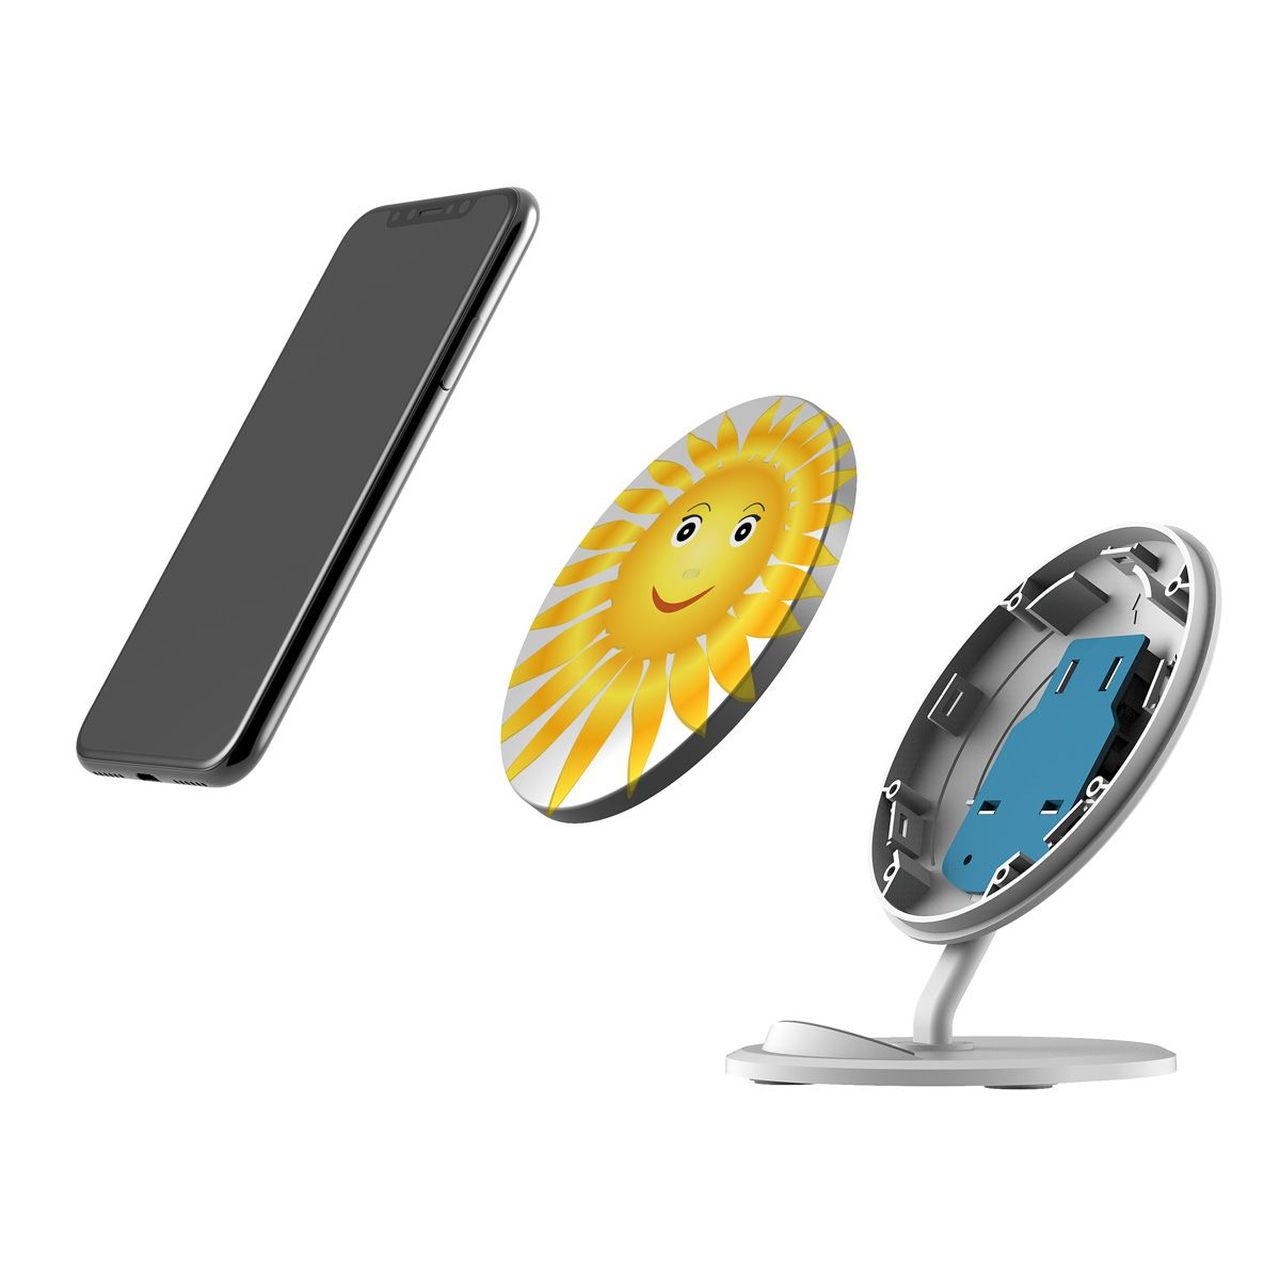 QI Wireless Charger iPhone 11,11 Pro, 11 Pro Max, Samsung Galaxy S10, S10+,Note 10/10+, Smiling Sun